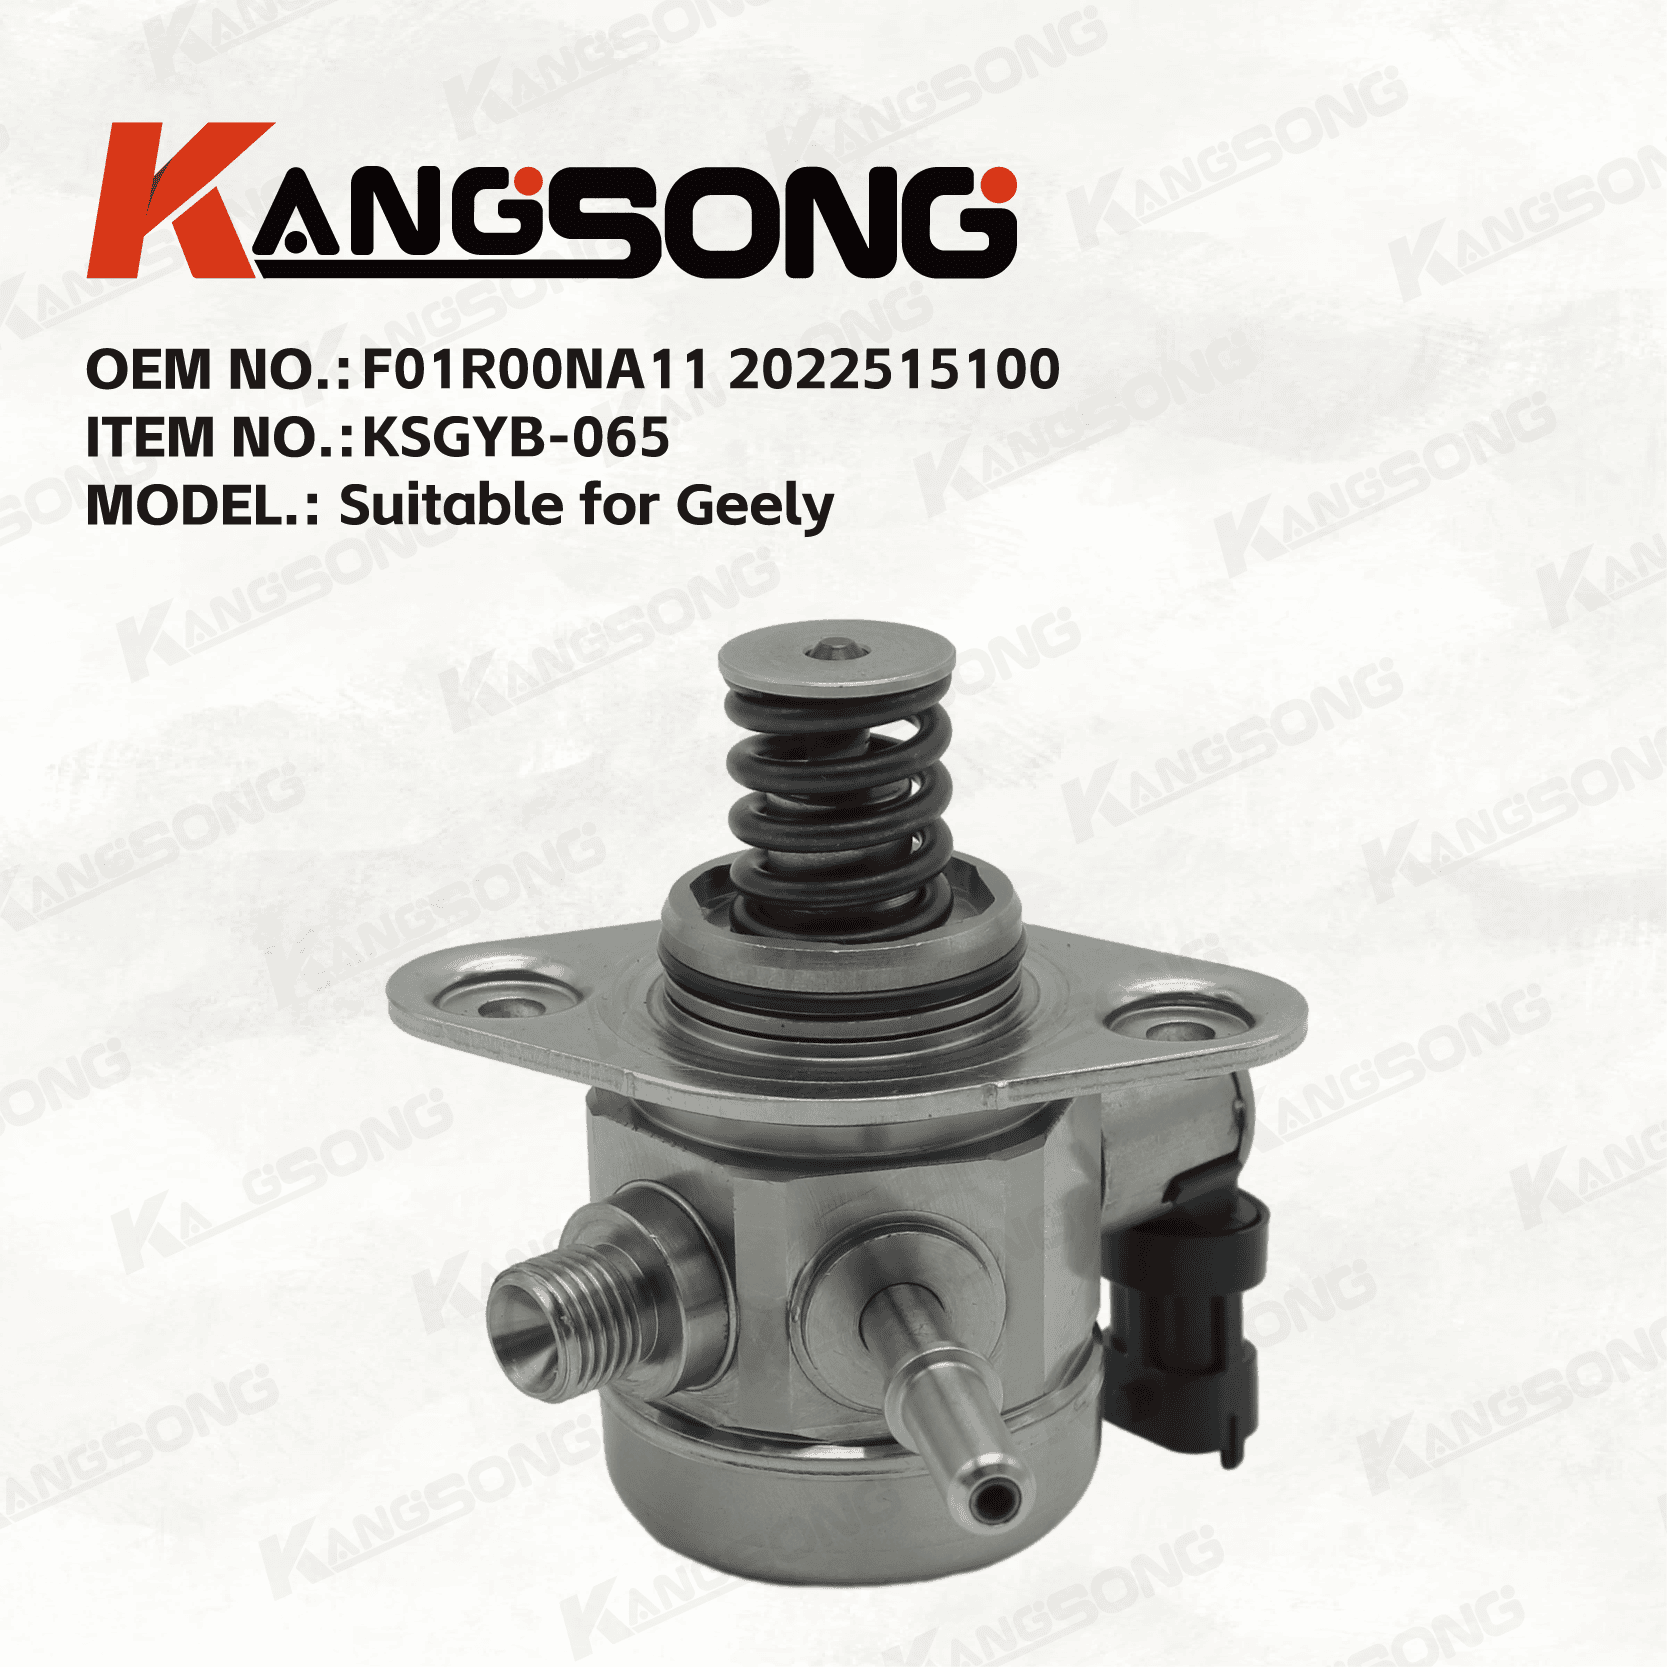 Applicable to Geely/F01R00NA11 2022515100/High pressure fuel pump/KSGYB-065